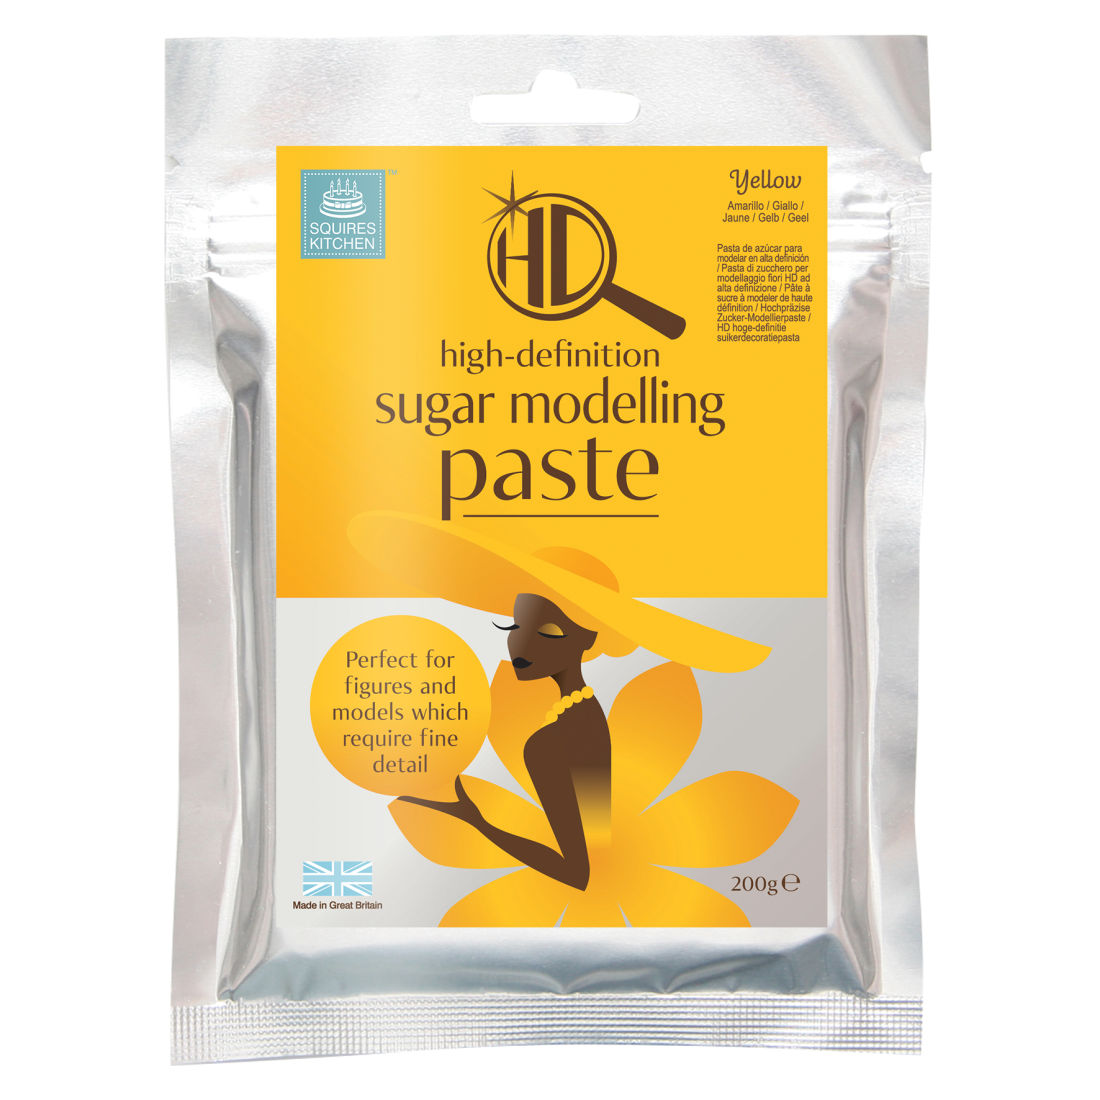 Sugar Modelling Paste by Squires Kitchen 200g ALL COLOURS for Cake Modelling 